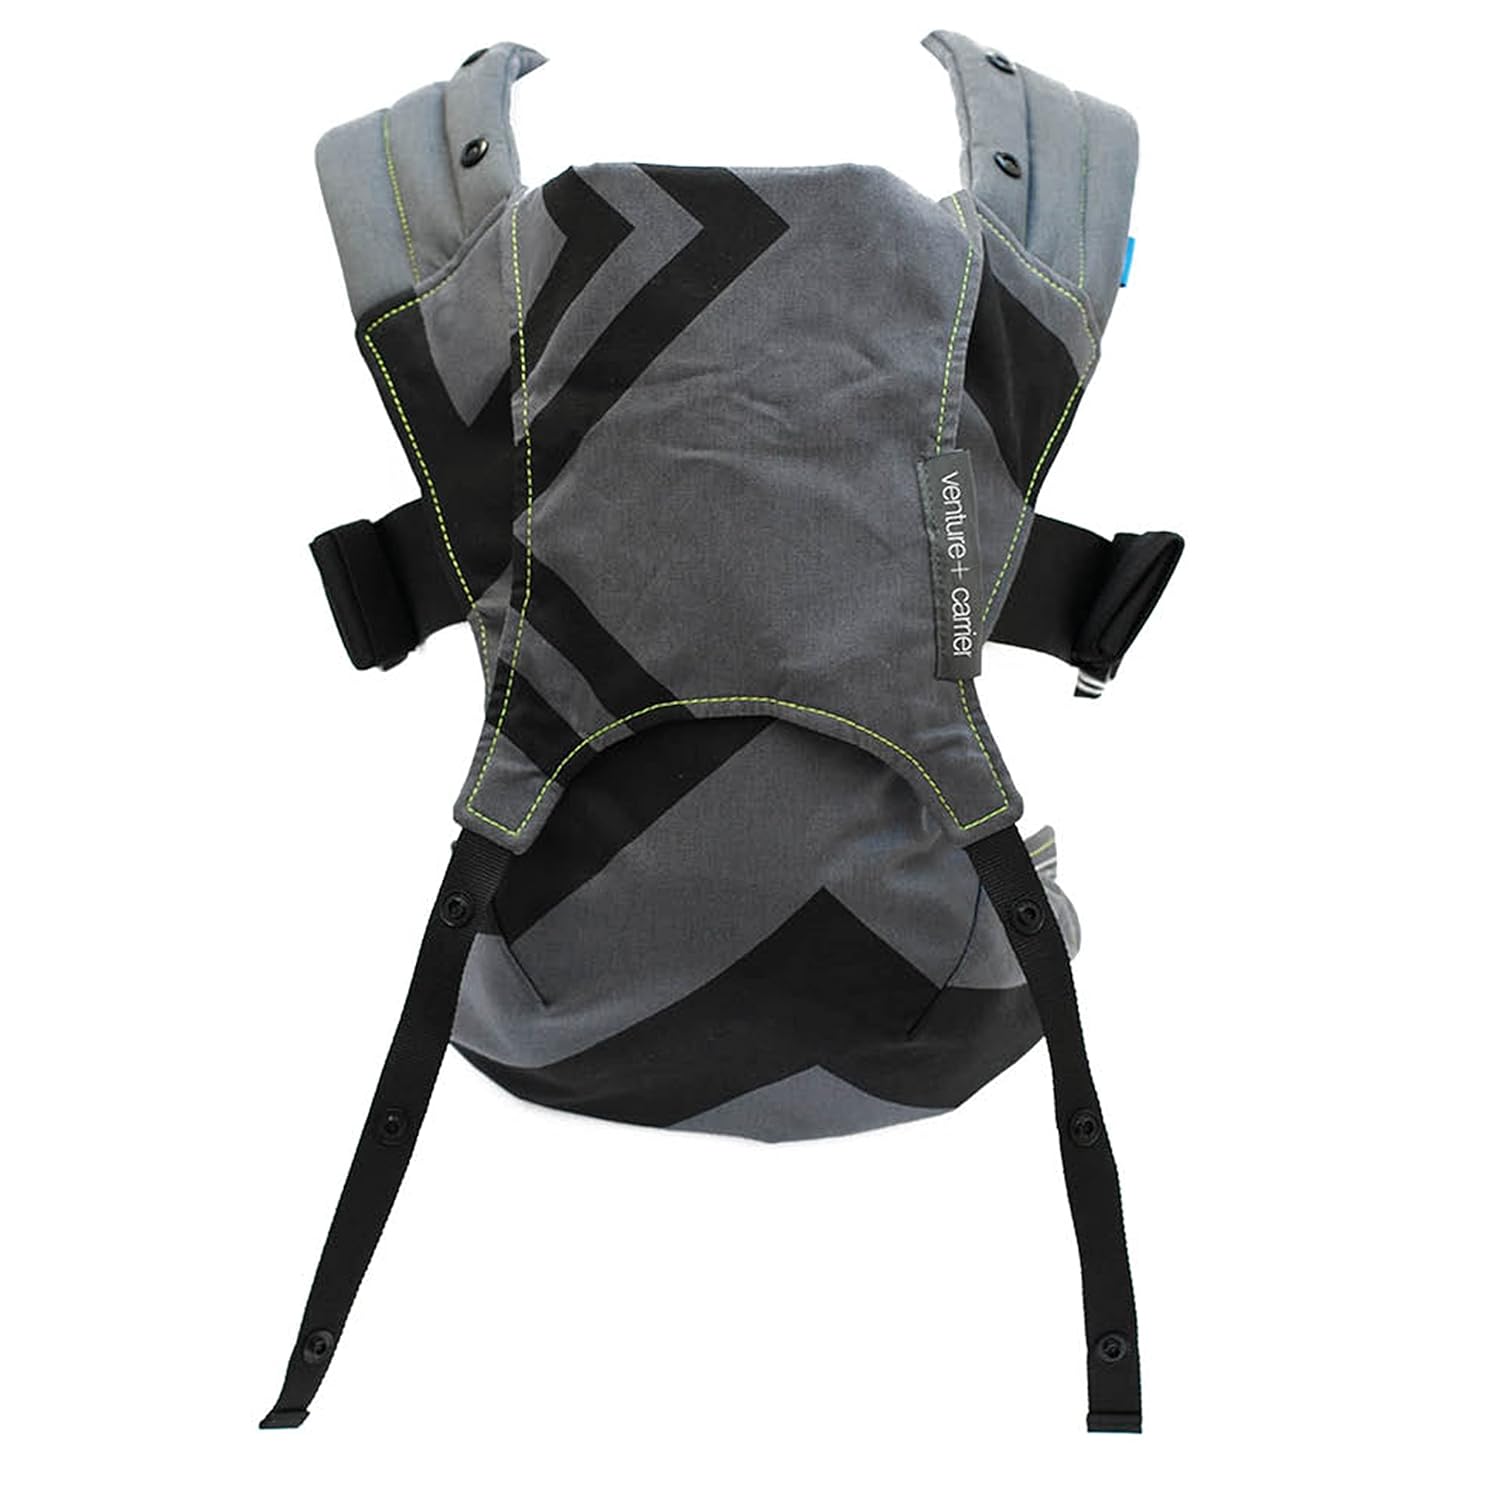 We Made Me Venture 2 in 1 Baby Carrier Harness for Back and Belly